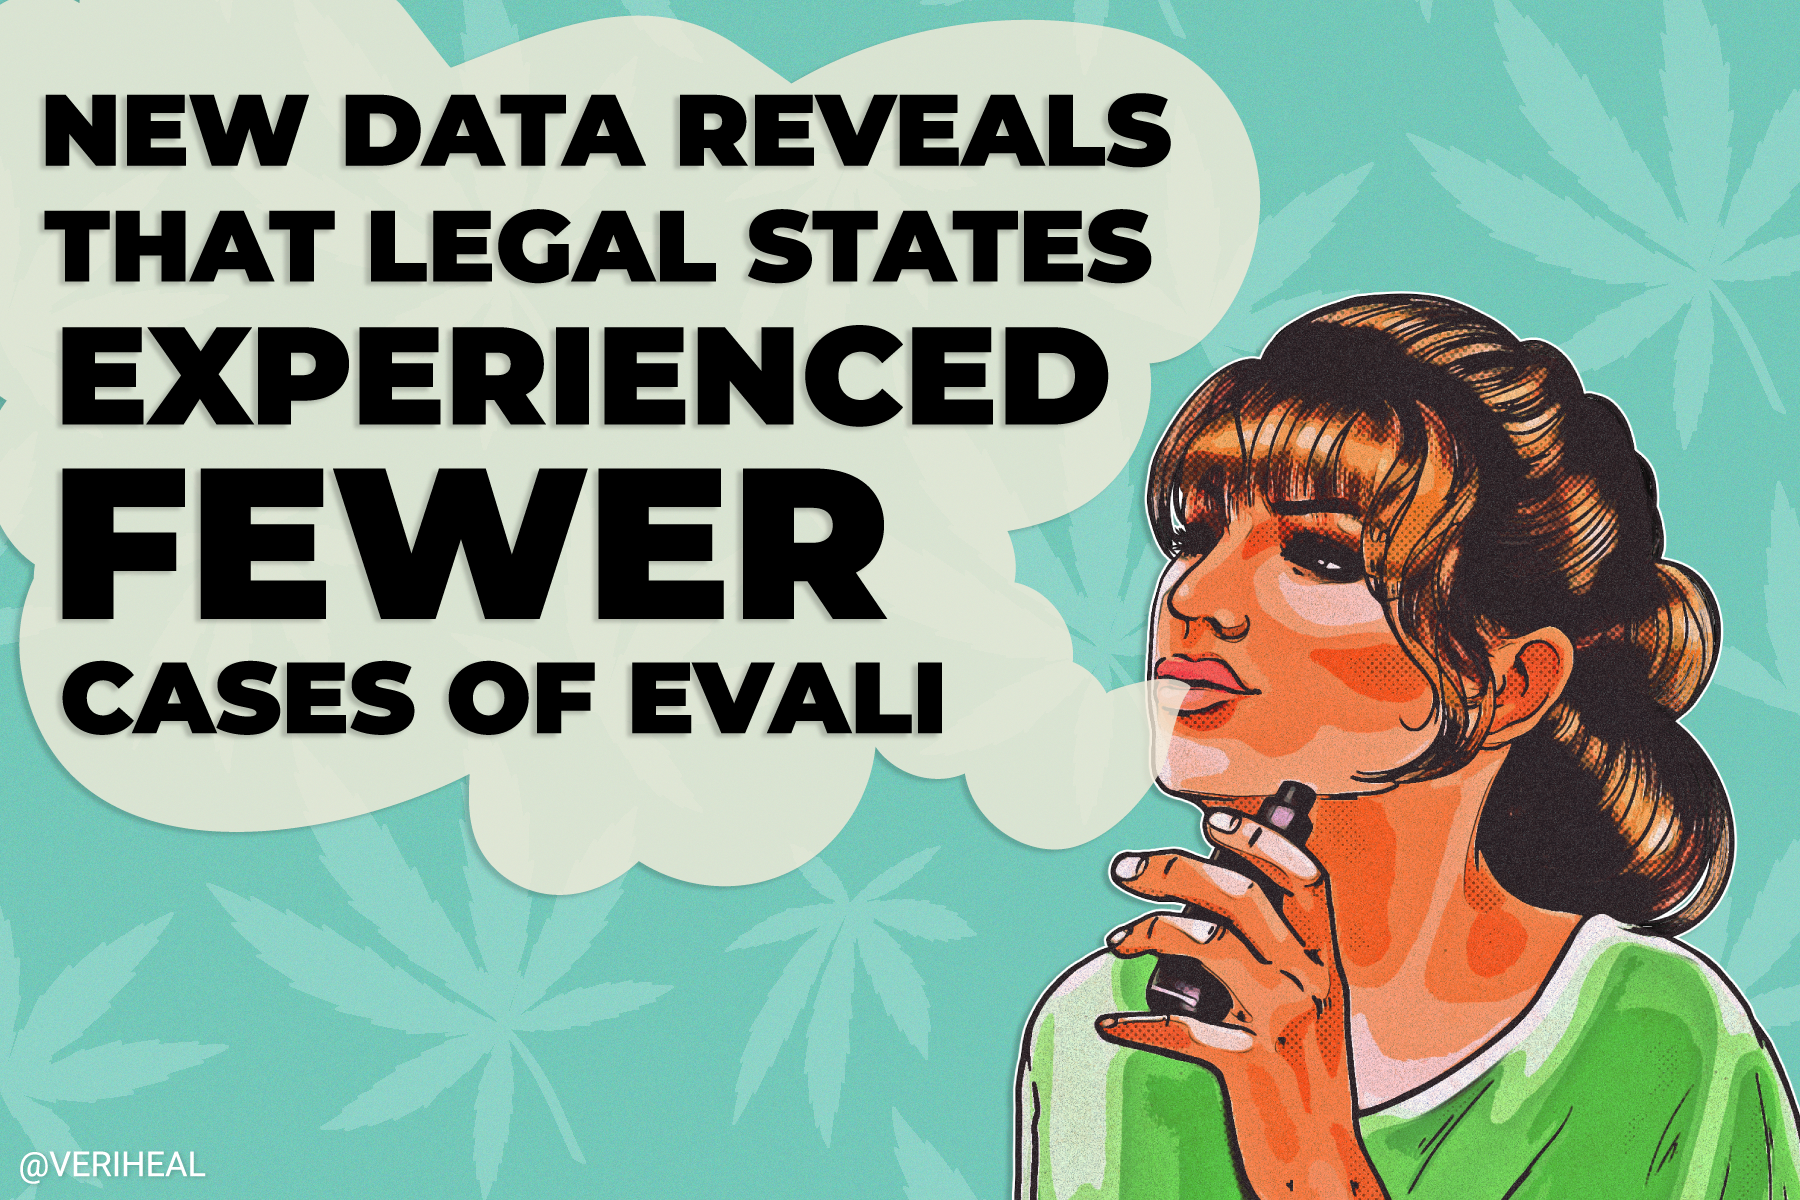 New Data Reveals Legal States Experienced Fewer Cases of EVALI